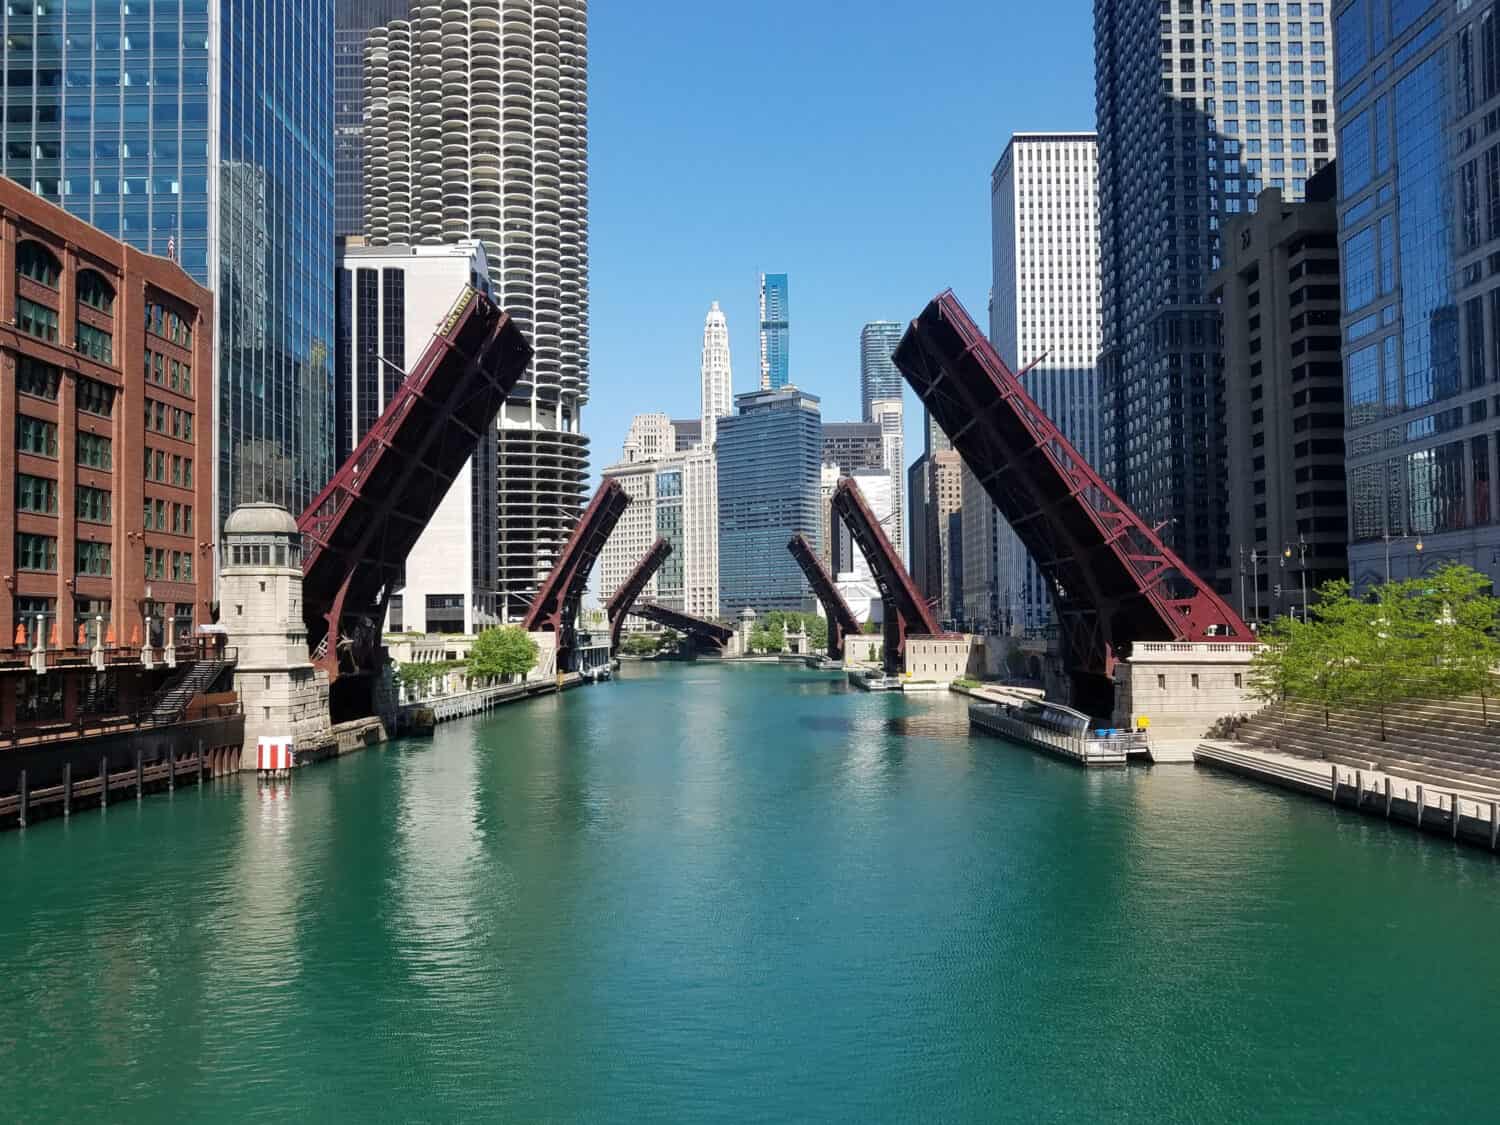 All Chicago River Drawbridges raised elevated at the same time under a clear blue sky in summer